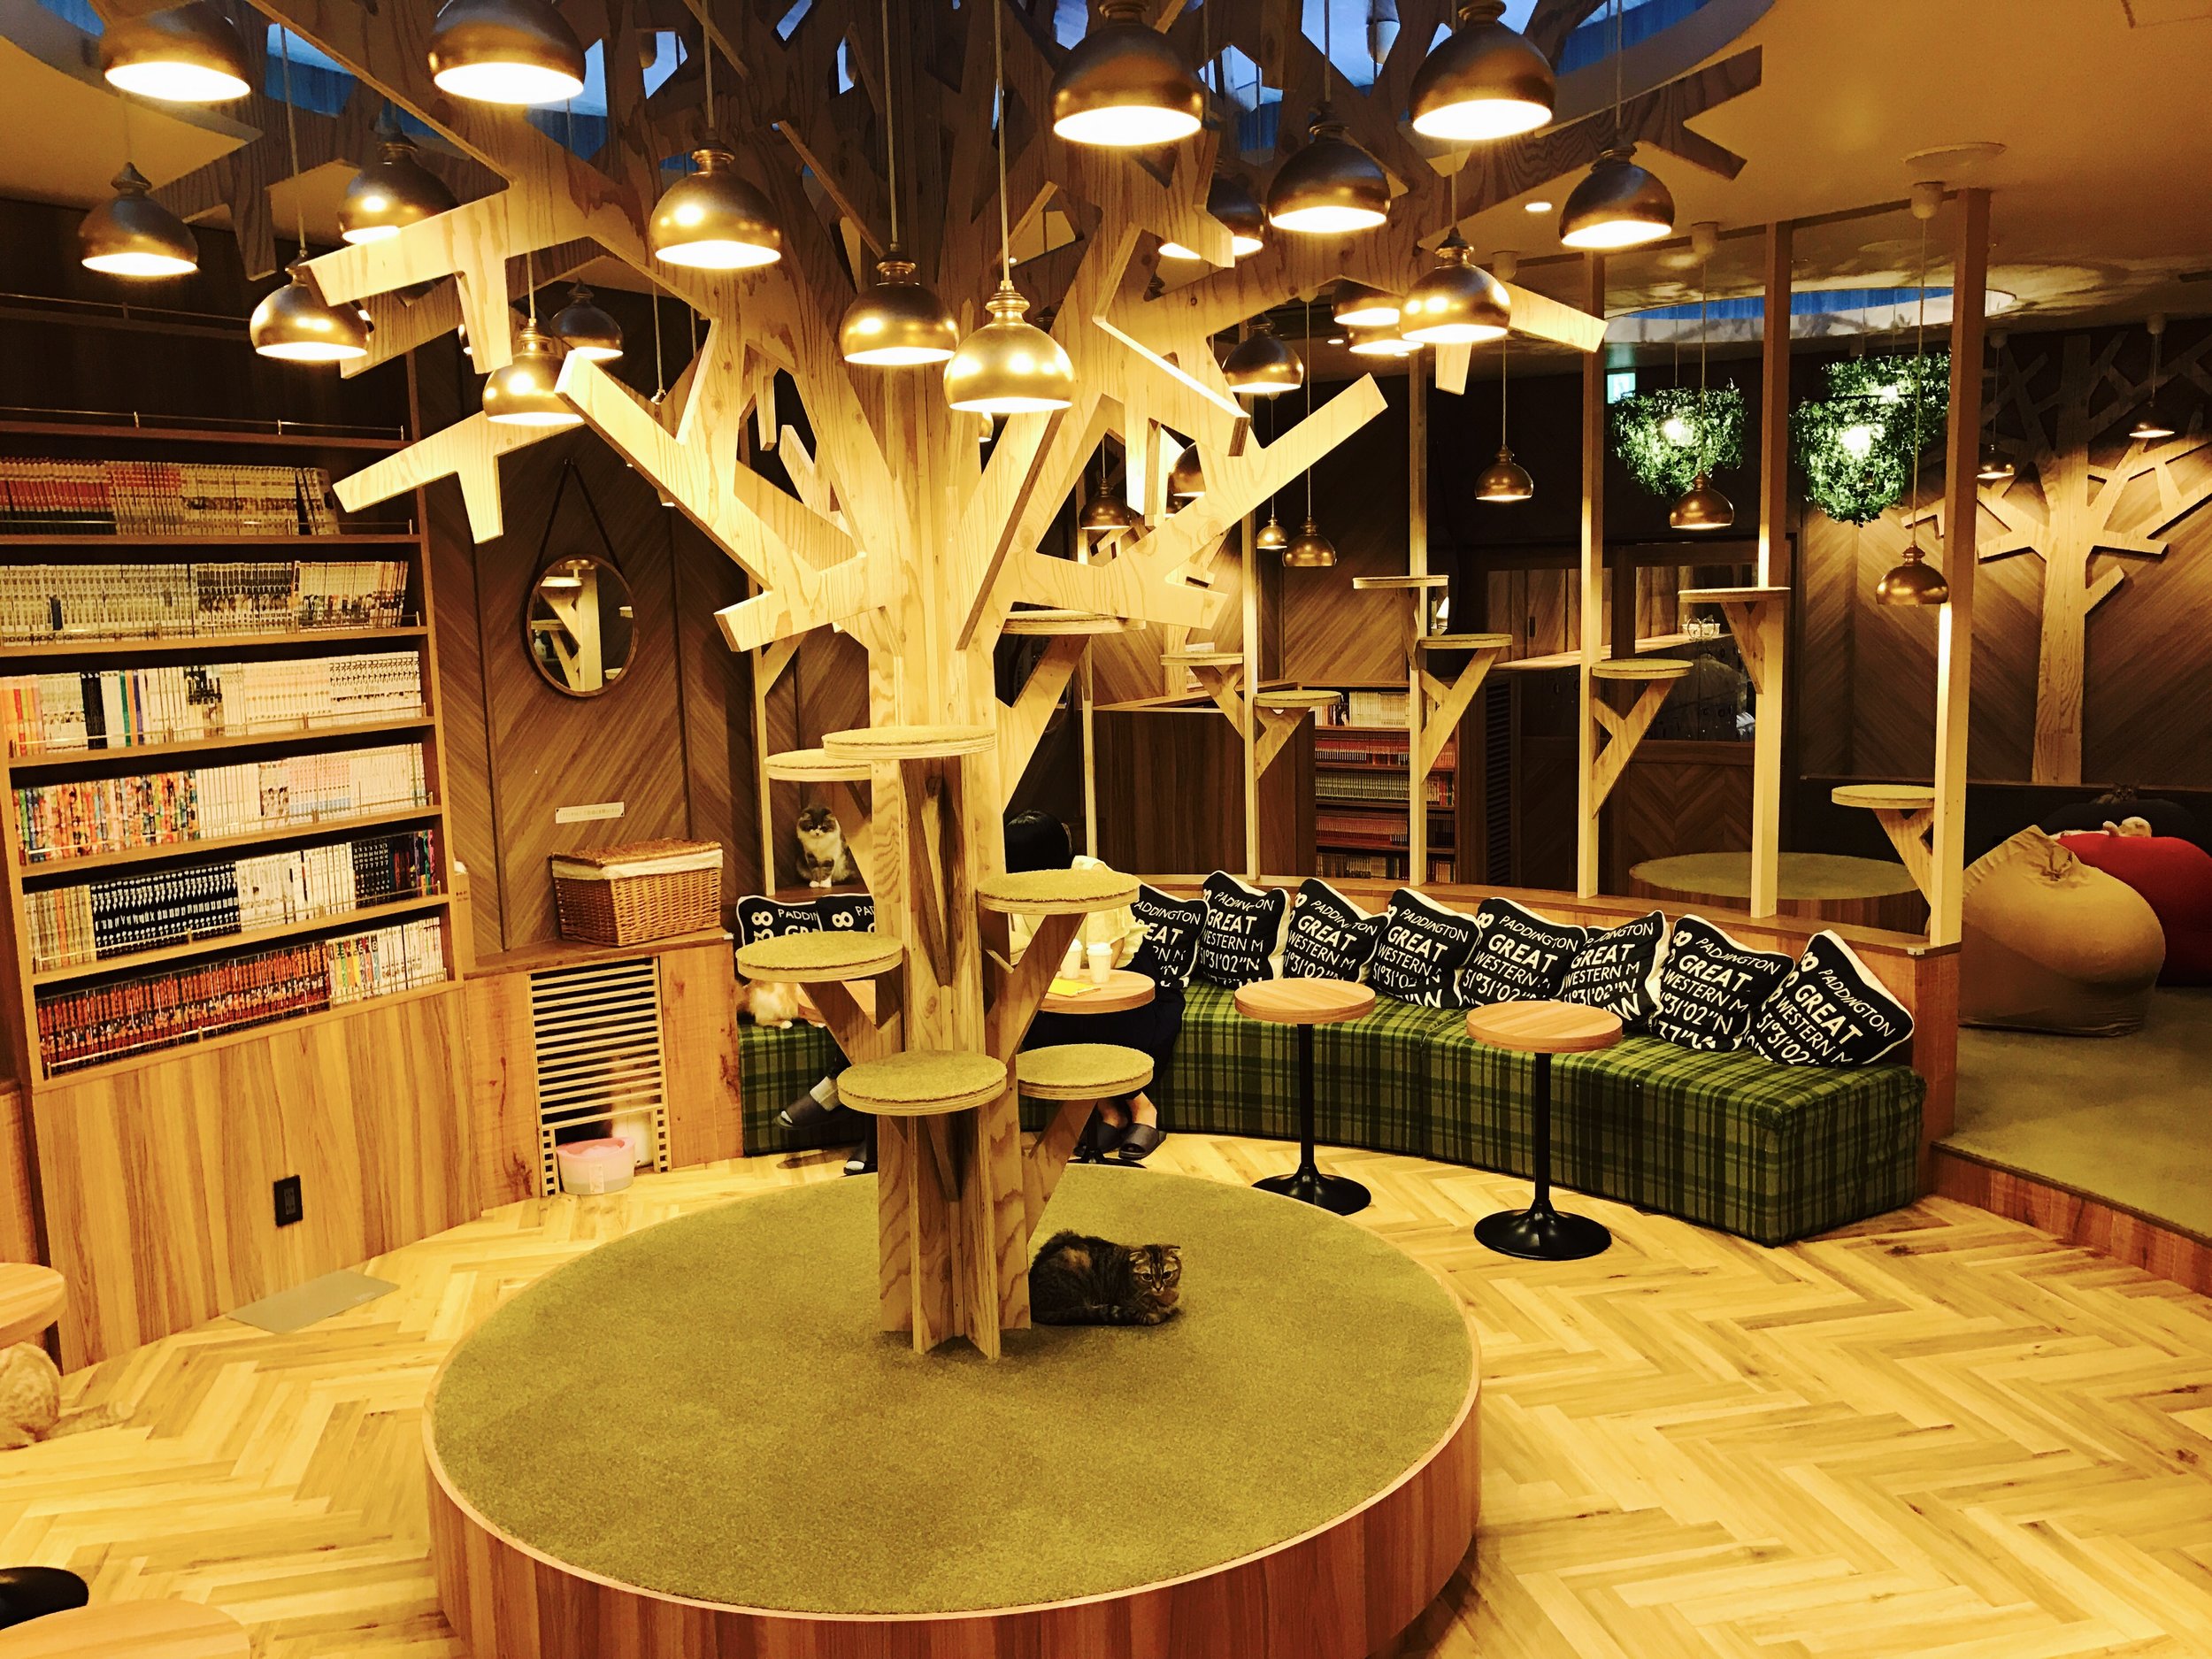 Cafe Mocha is known for its beautiful interiors featuring a signature wooden tree that the cats can climb